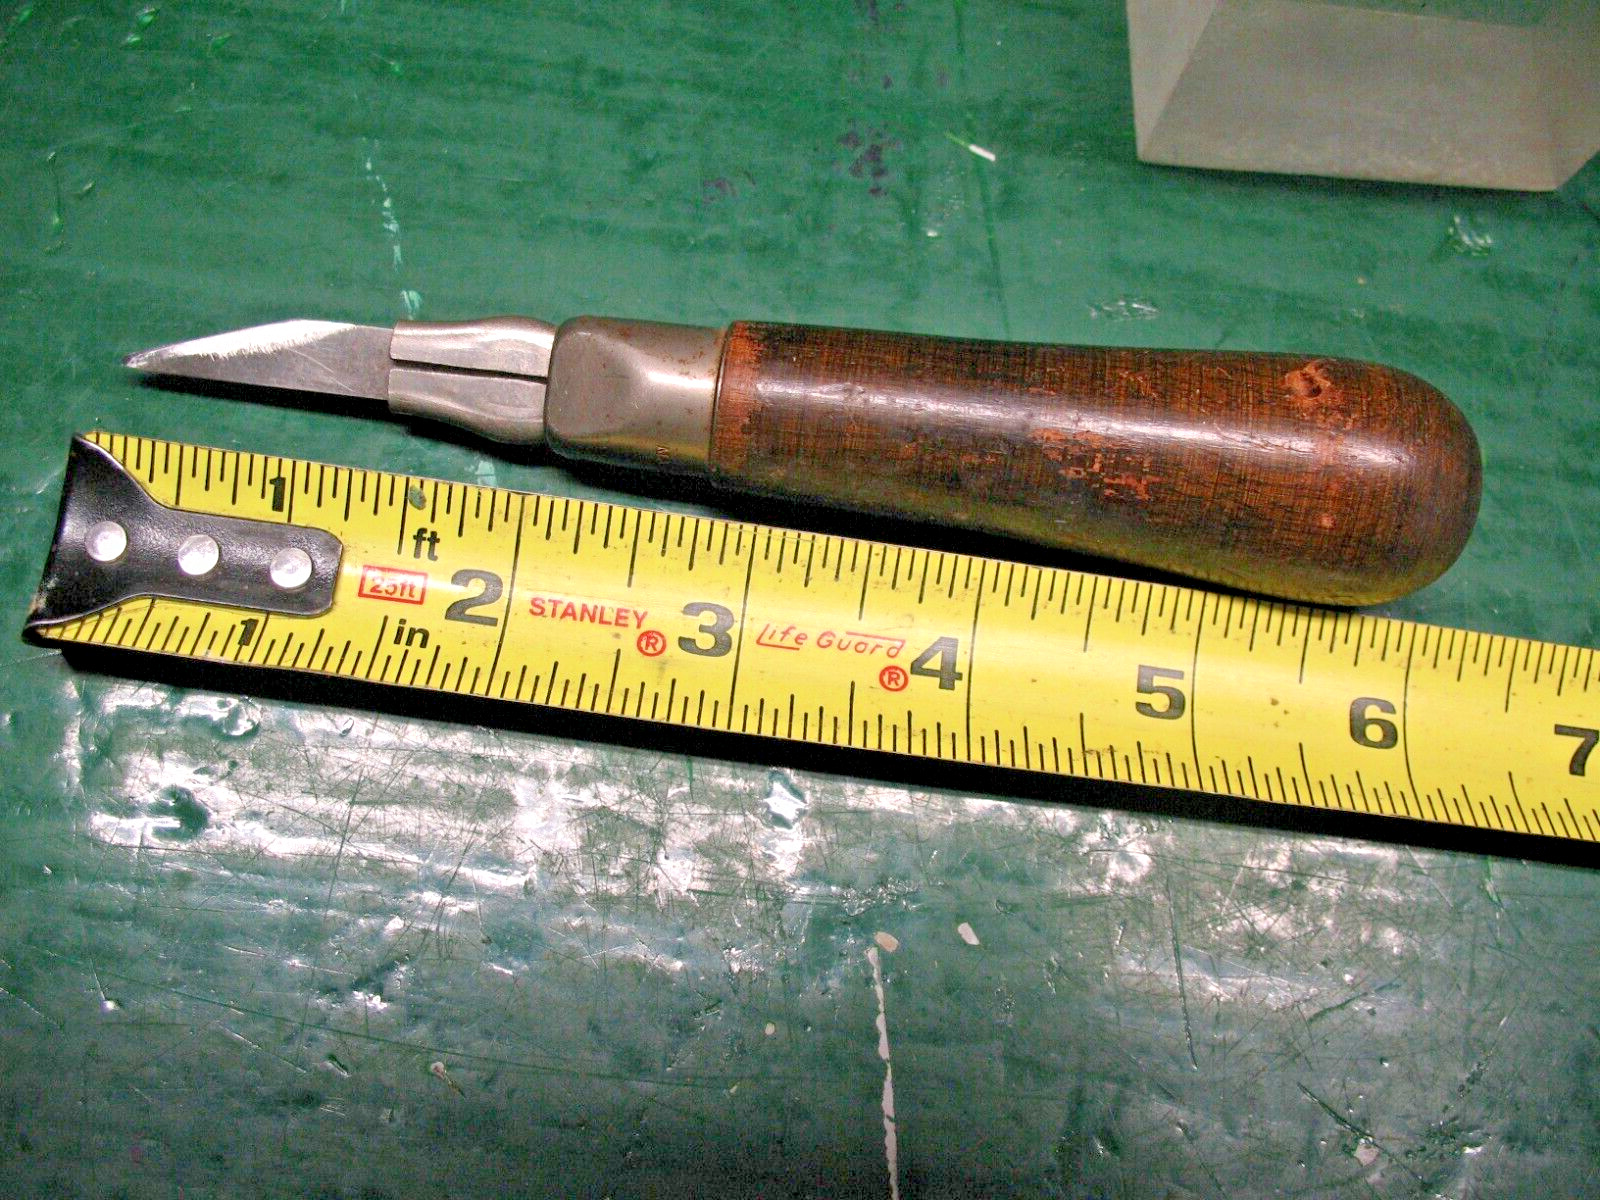 HYDE MFG. CO. I.P. No. 1  WOODWORKING   KNIFE